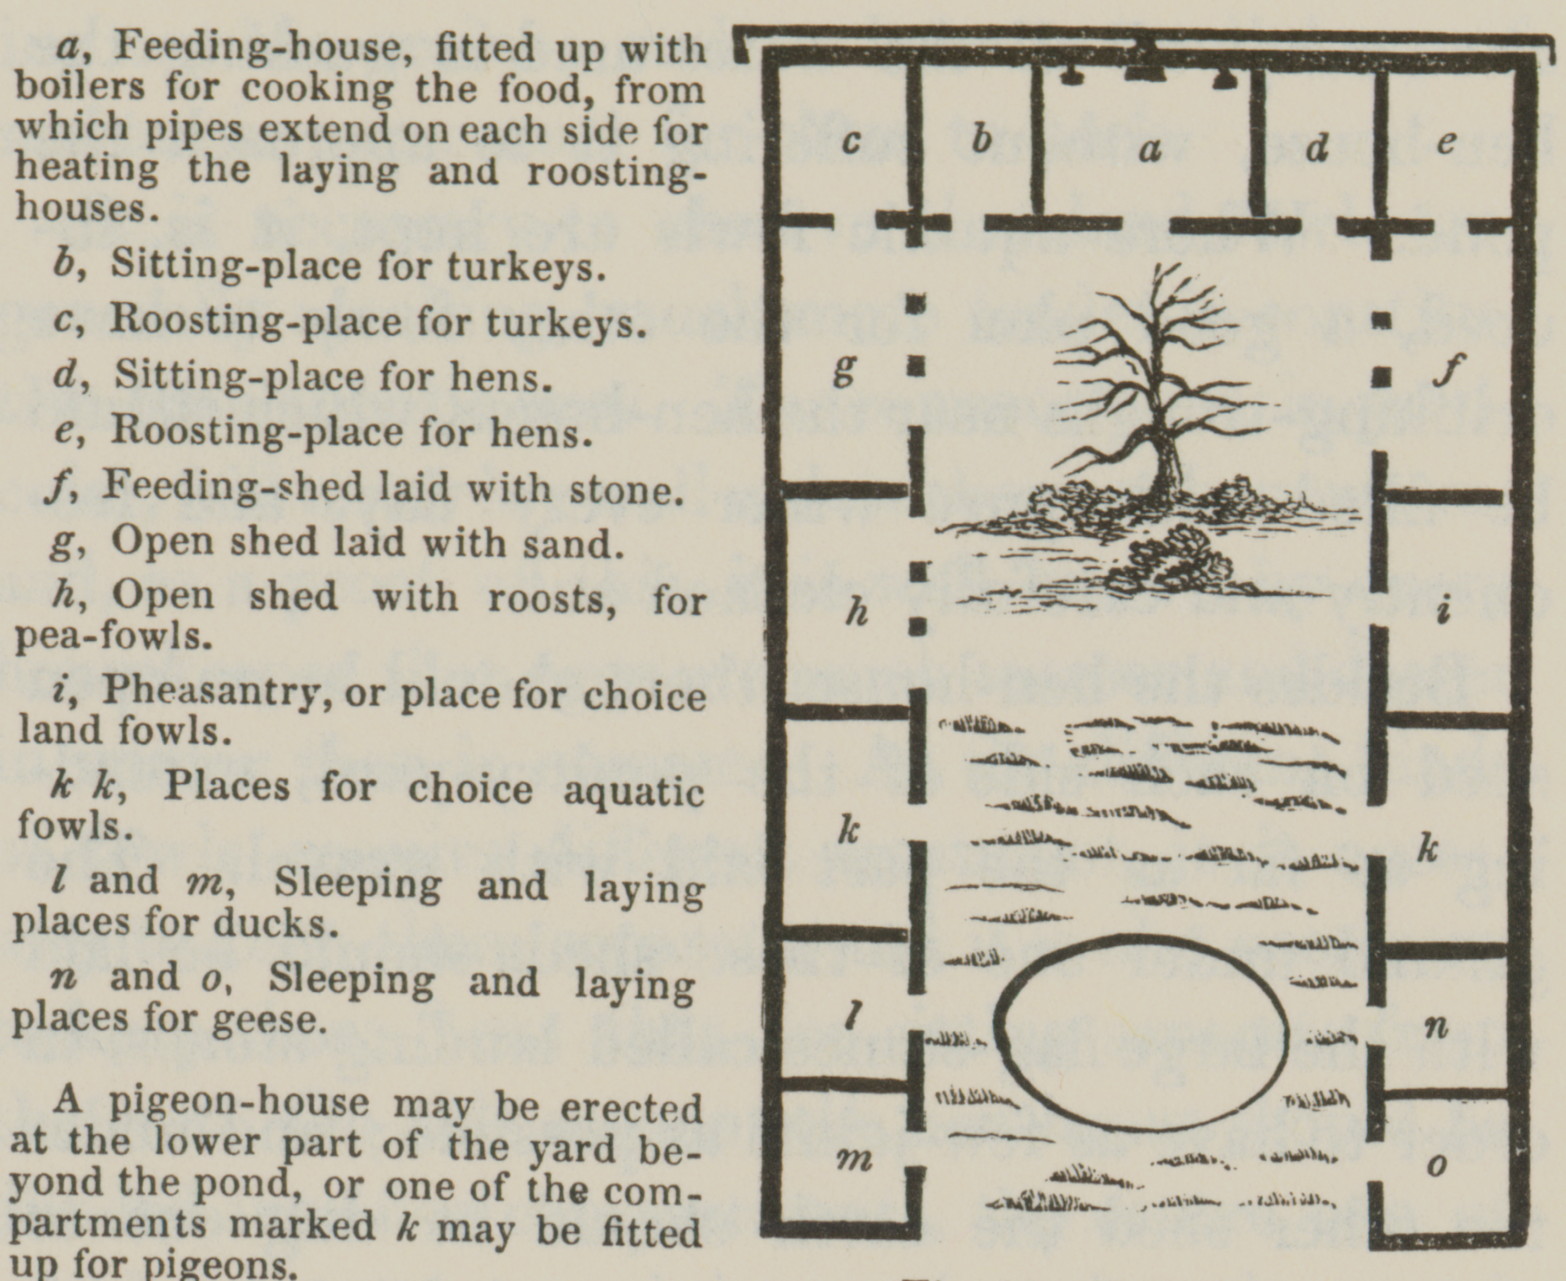 plan for U-shaped poultry house and interior yard